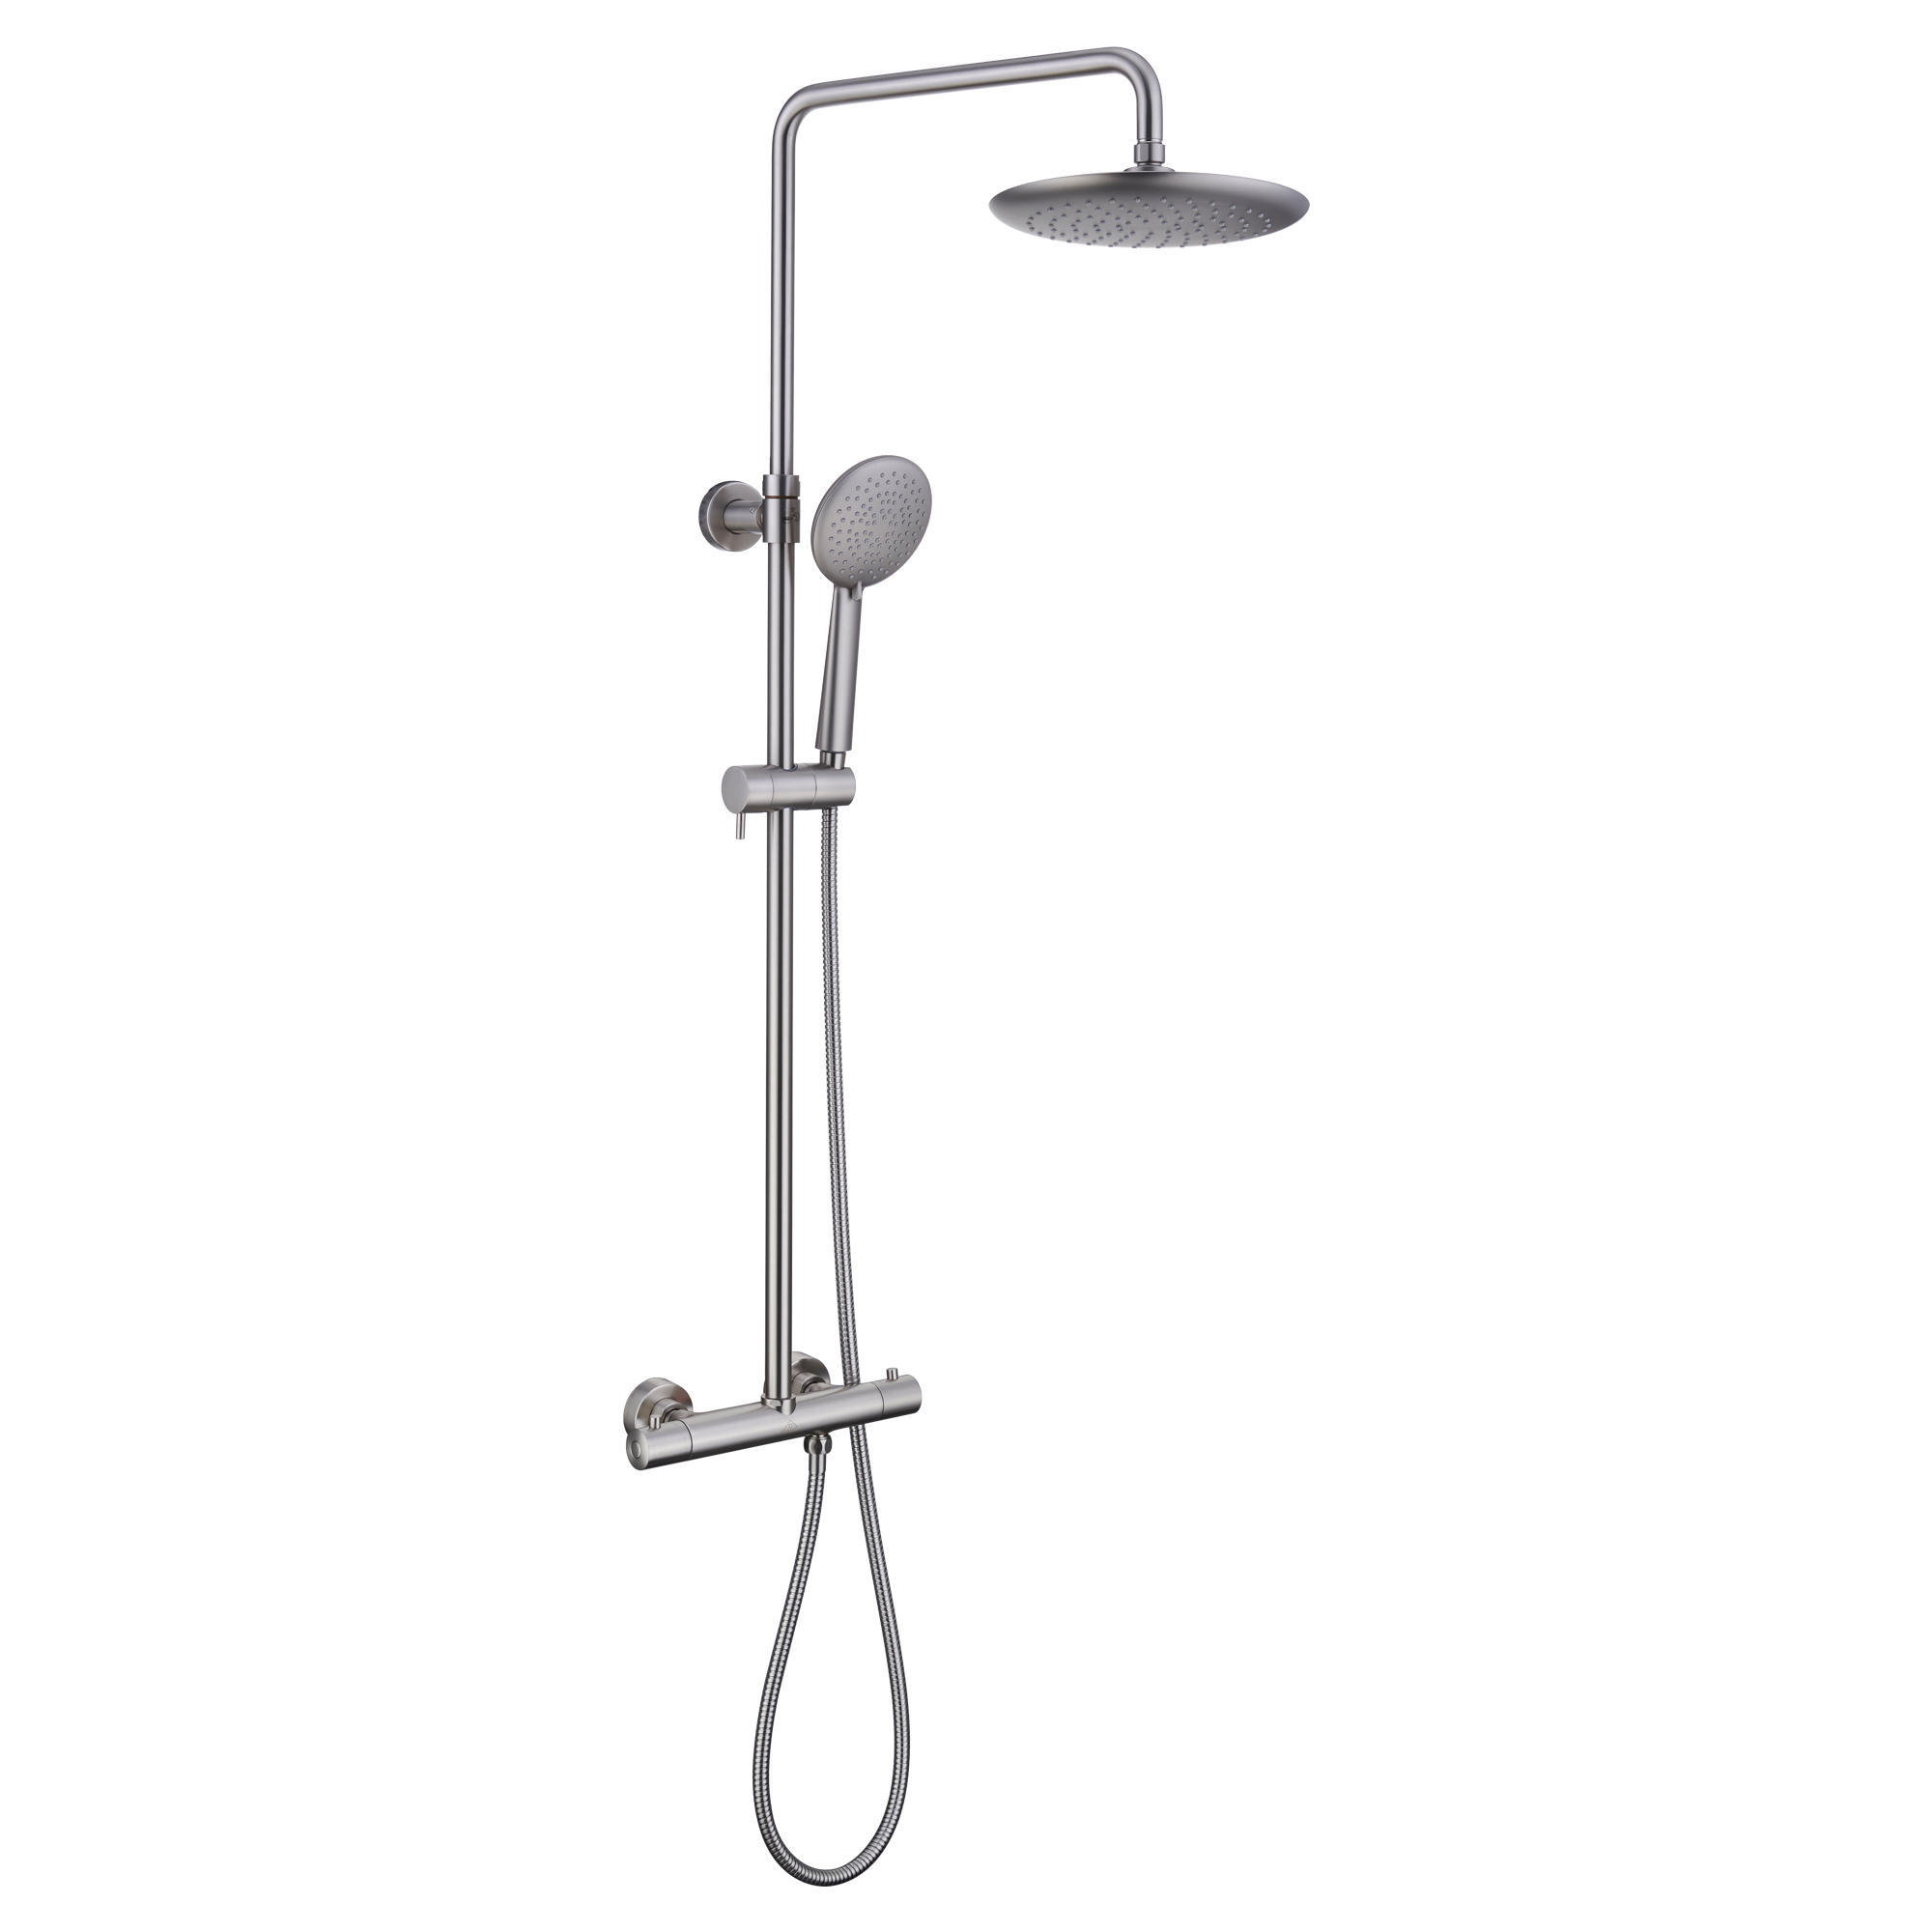 9.5 inch Thermostatic rain shower faucet  (brushed nickel) slide bar included-CASAINC